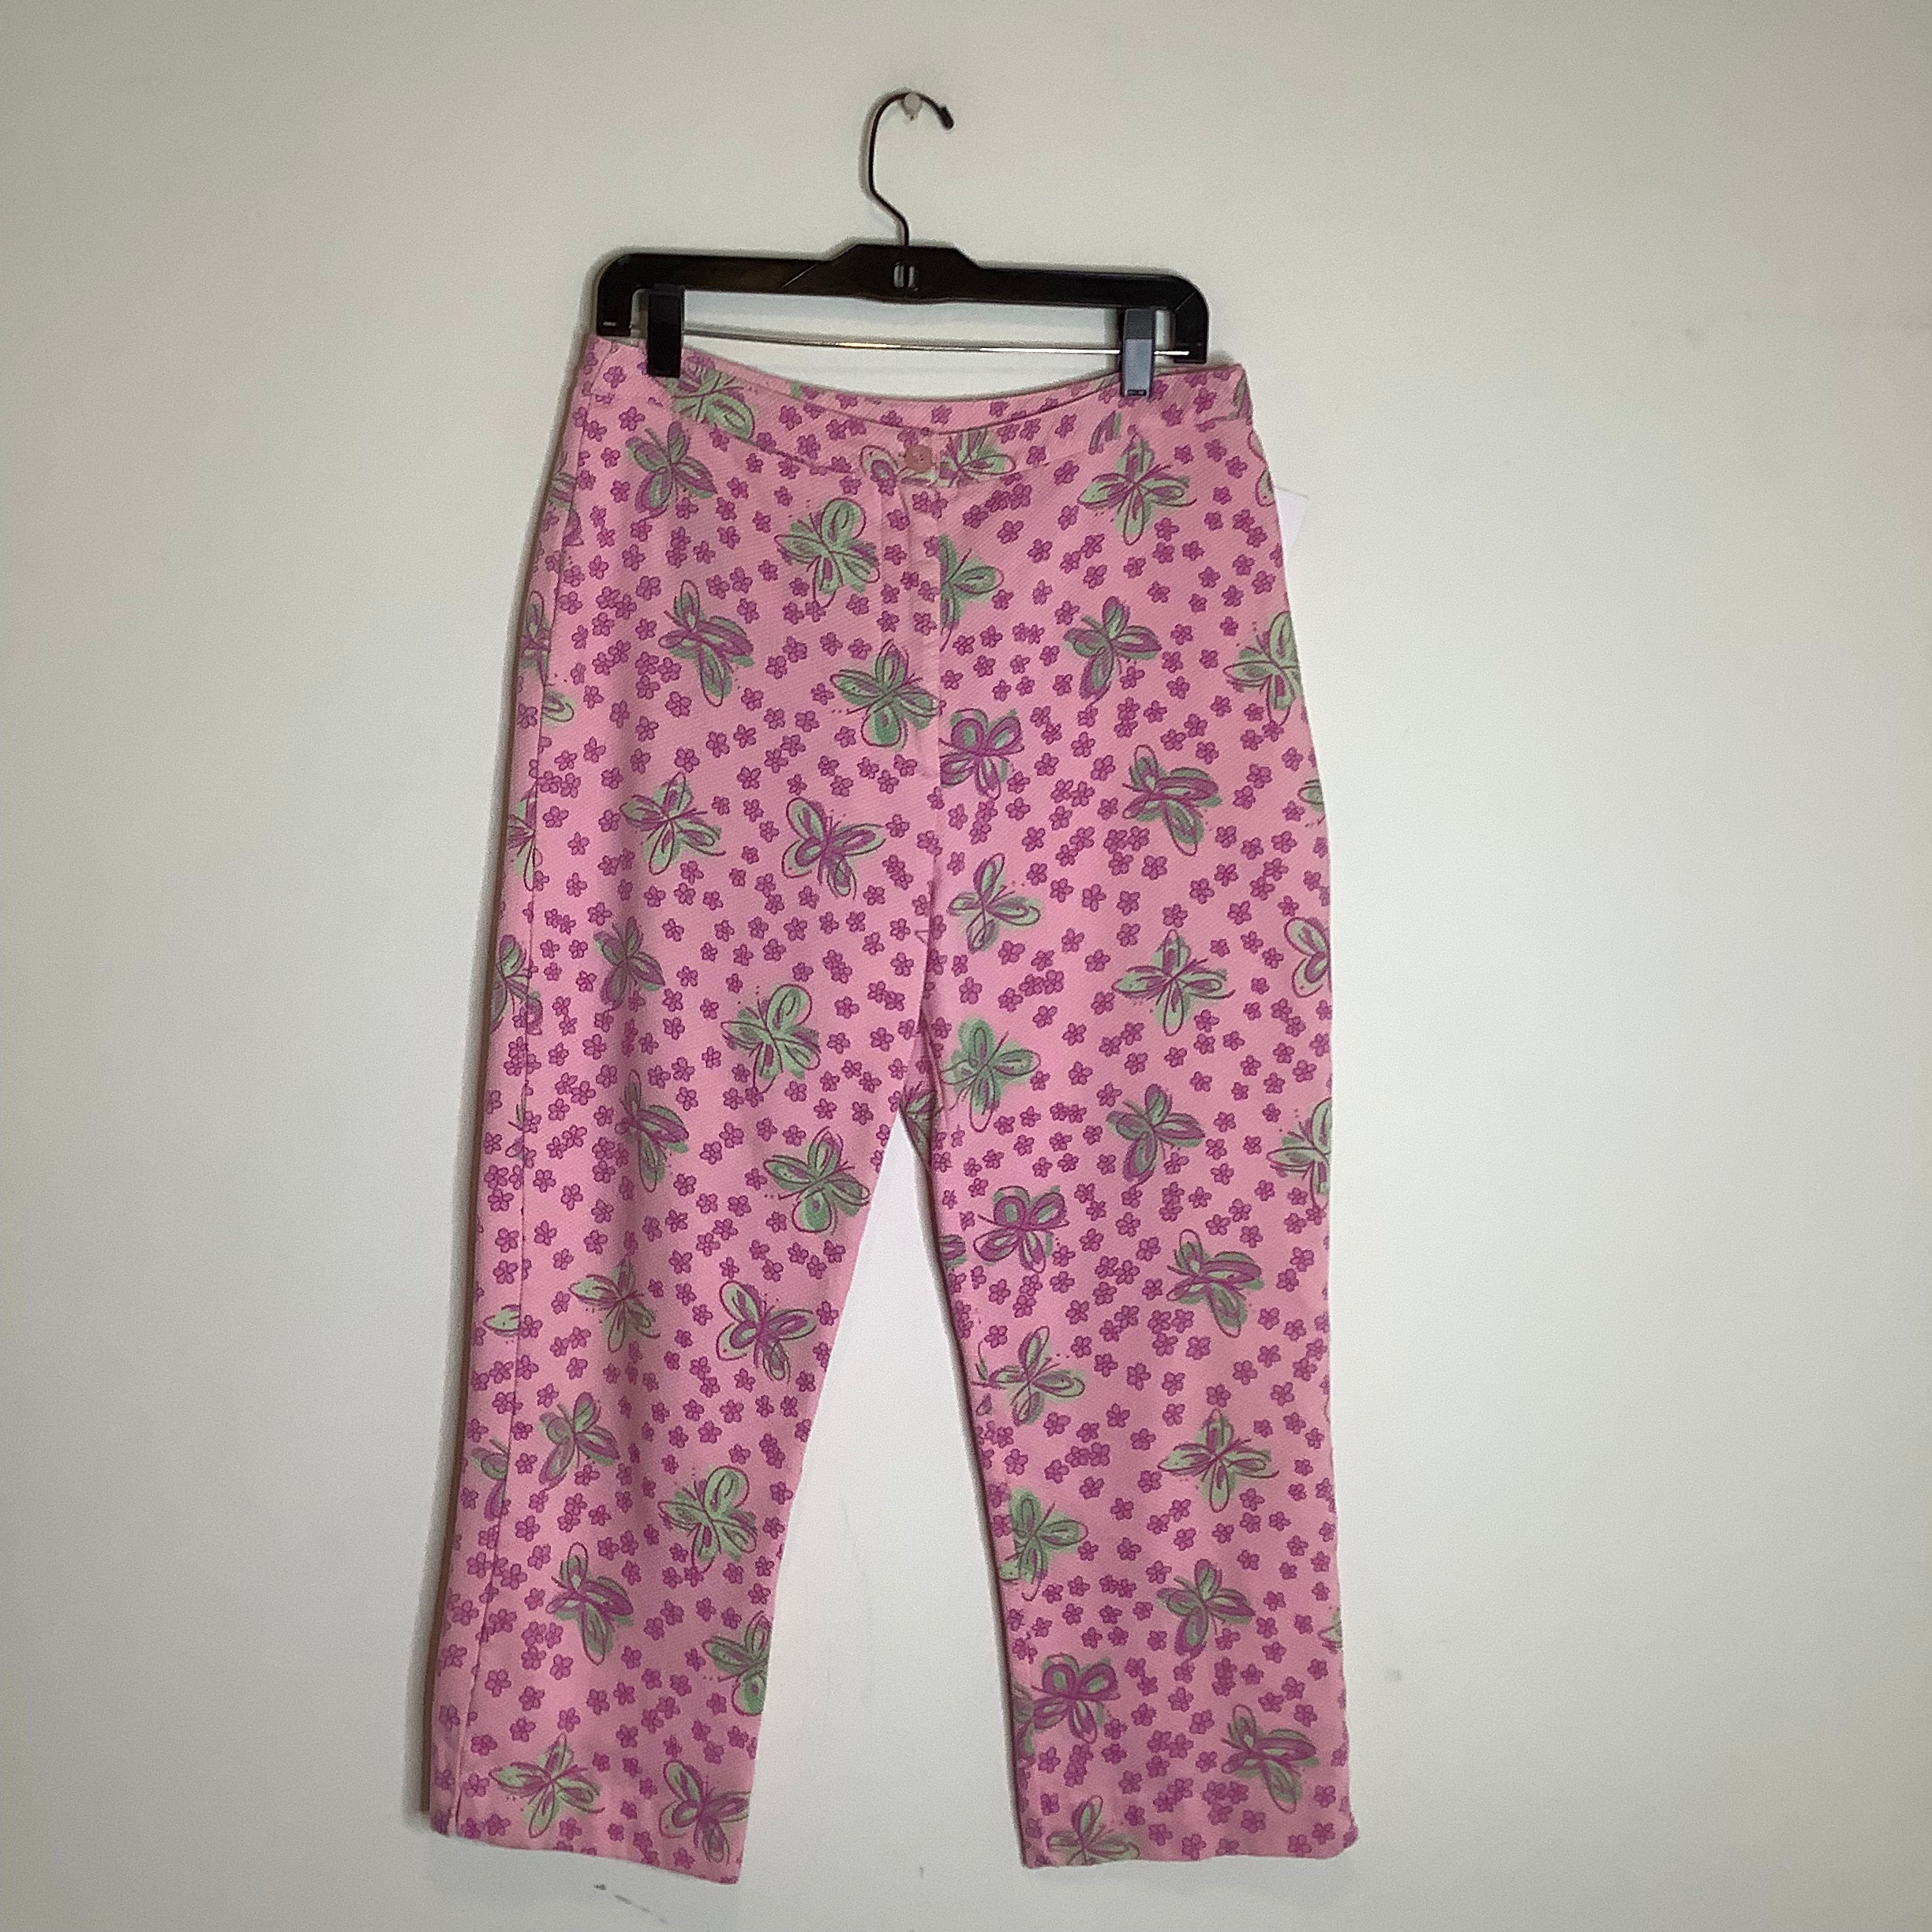 Lilly Pulitzer Pink Pants Size 10 Vintage